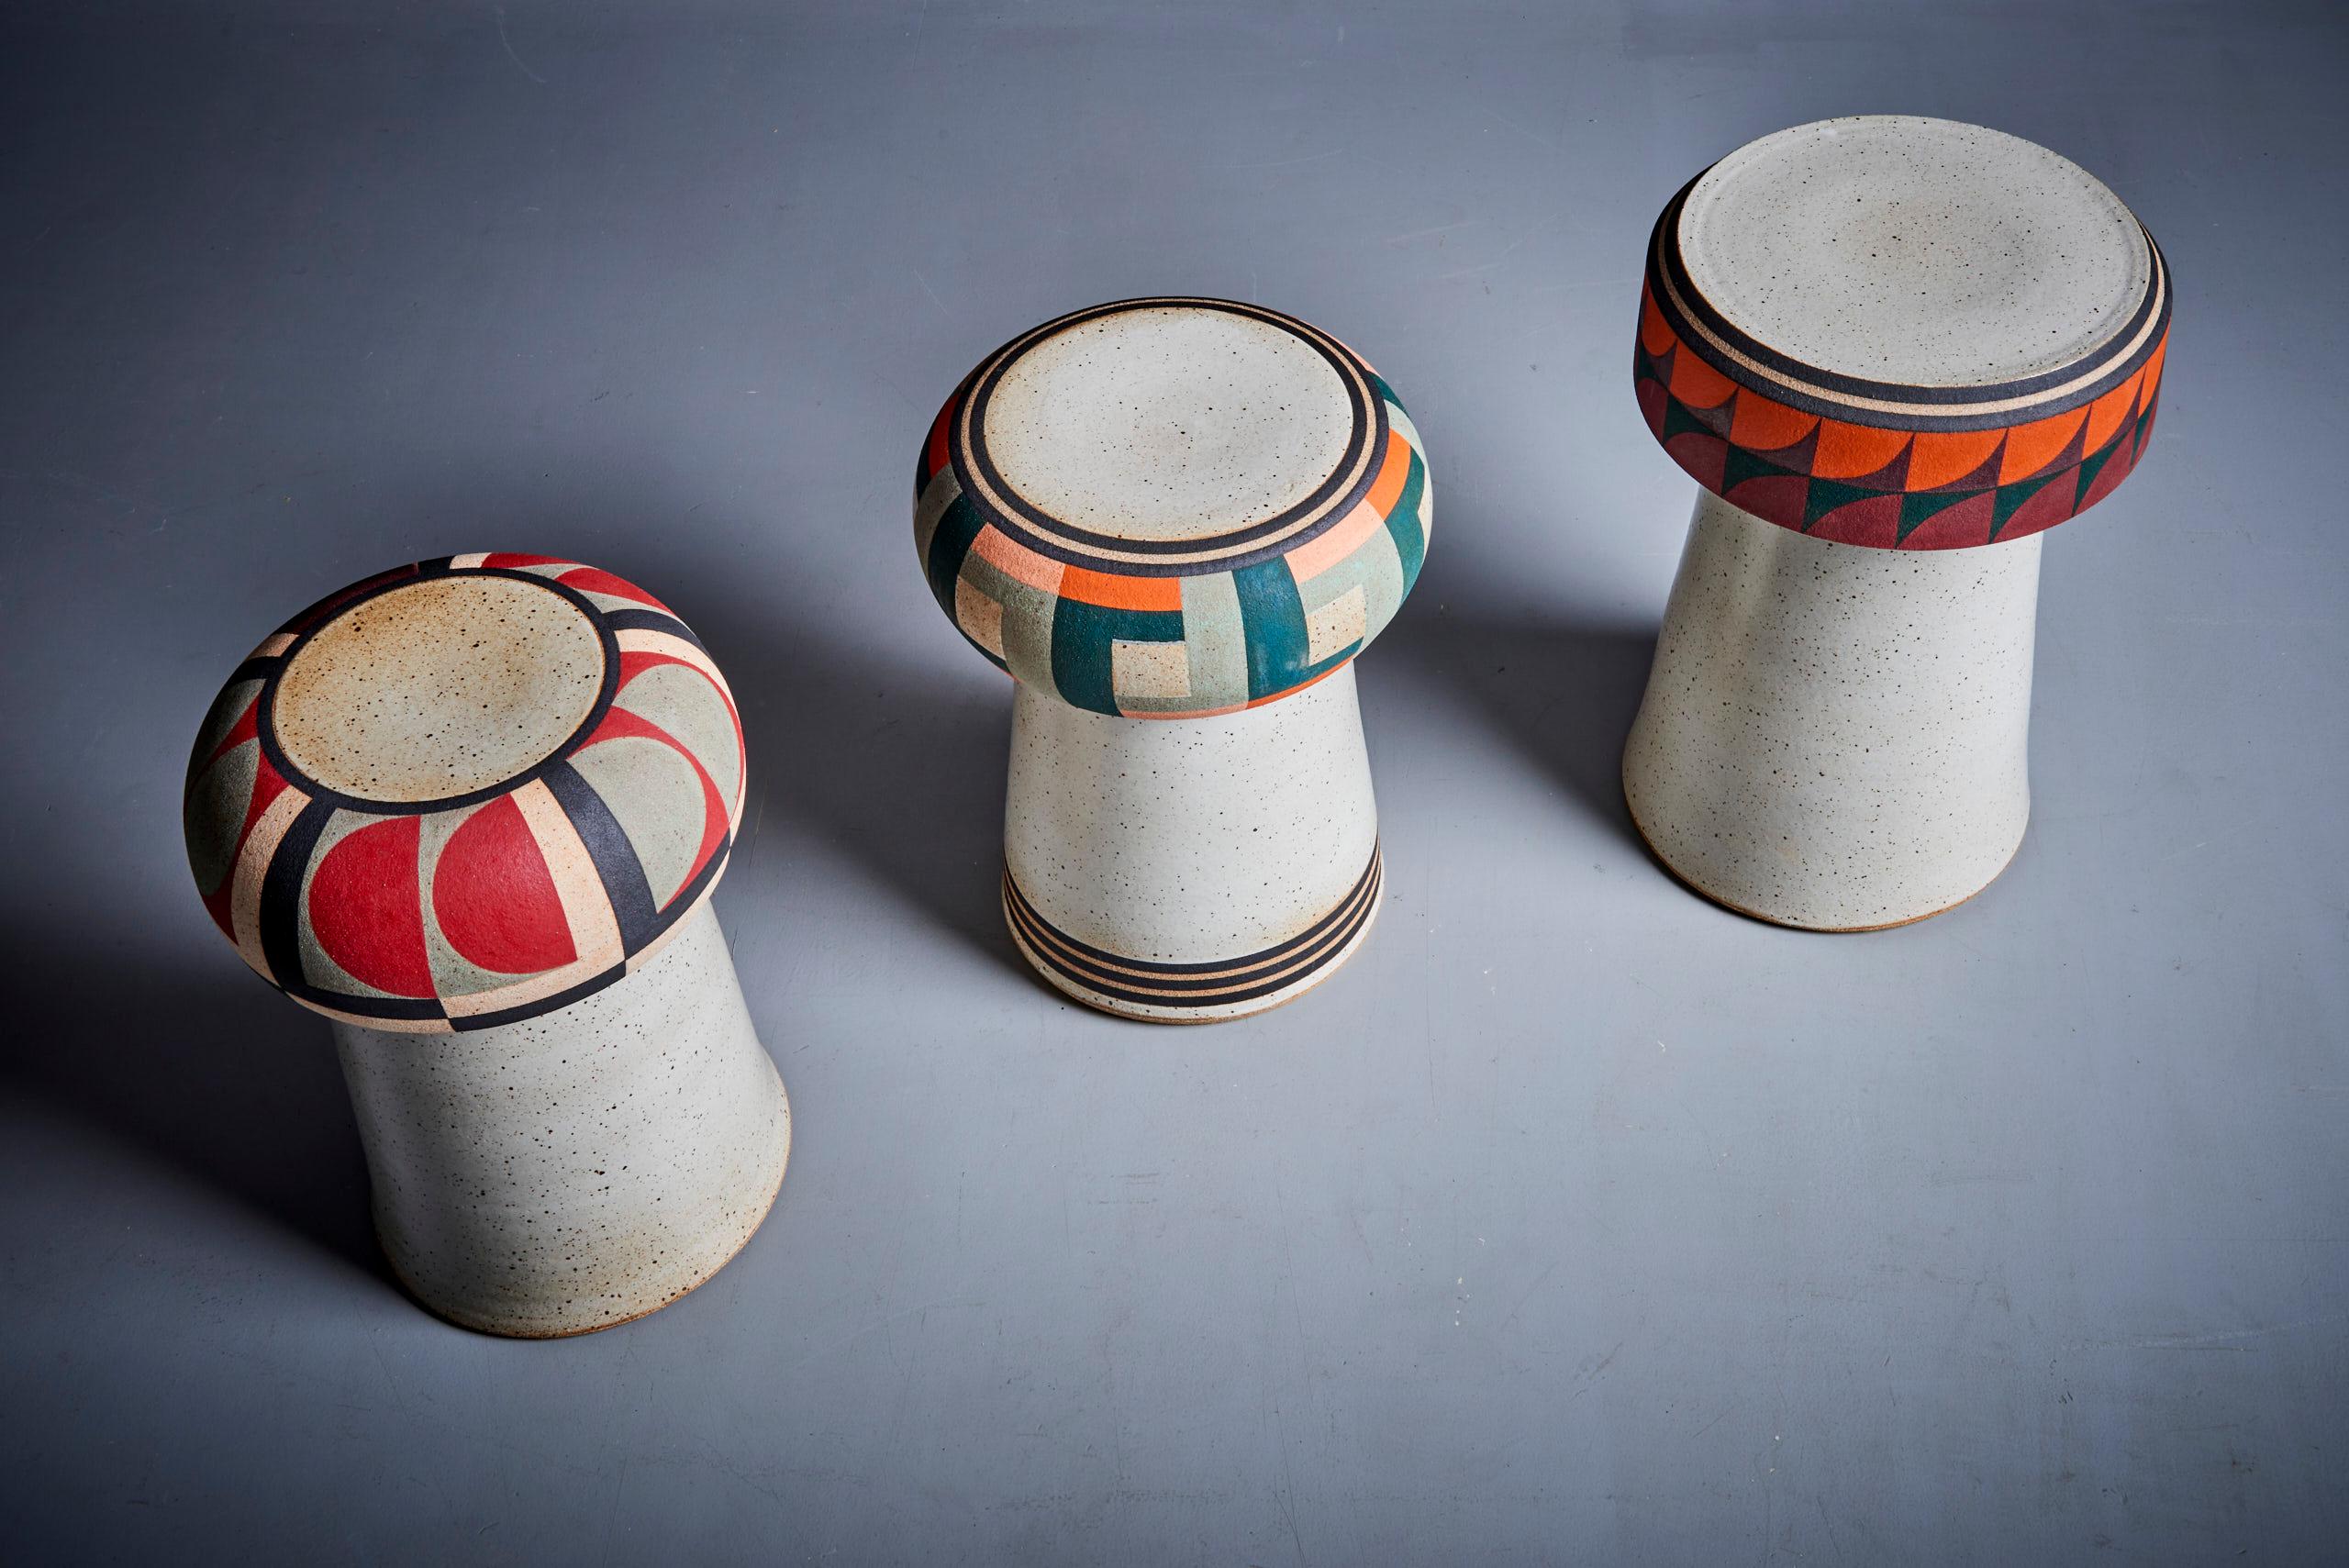 Kat and Roger Set of 3 hand-painted Studio ceramic stools For Sale 12